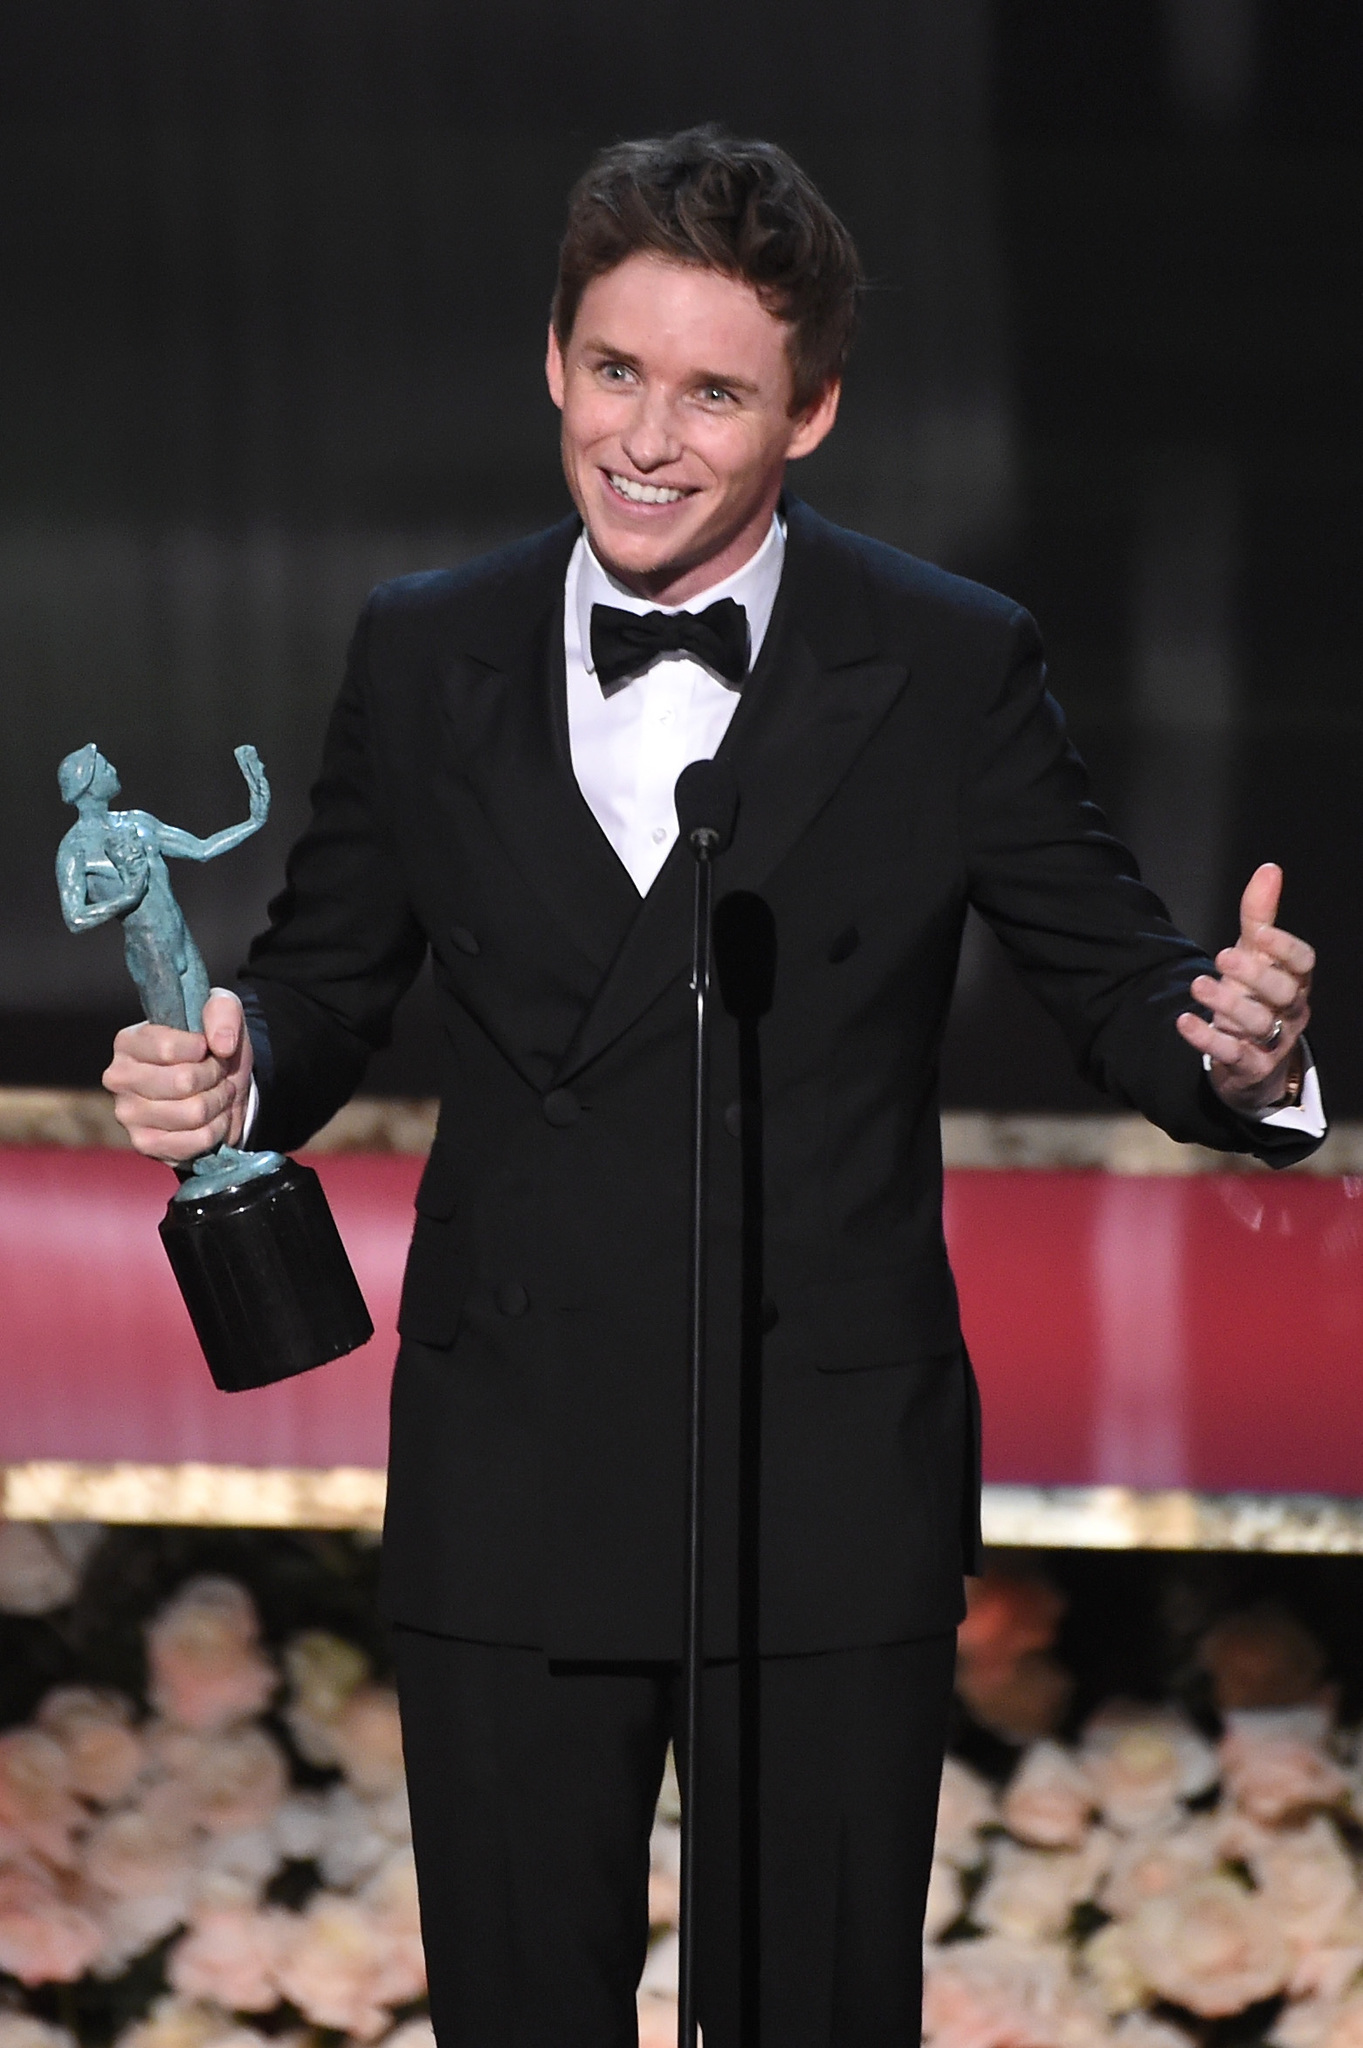 Eddie Redmayne at event of The 21st Annual Screen Actors Guild Awards (2015)